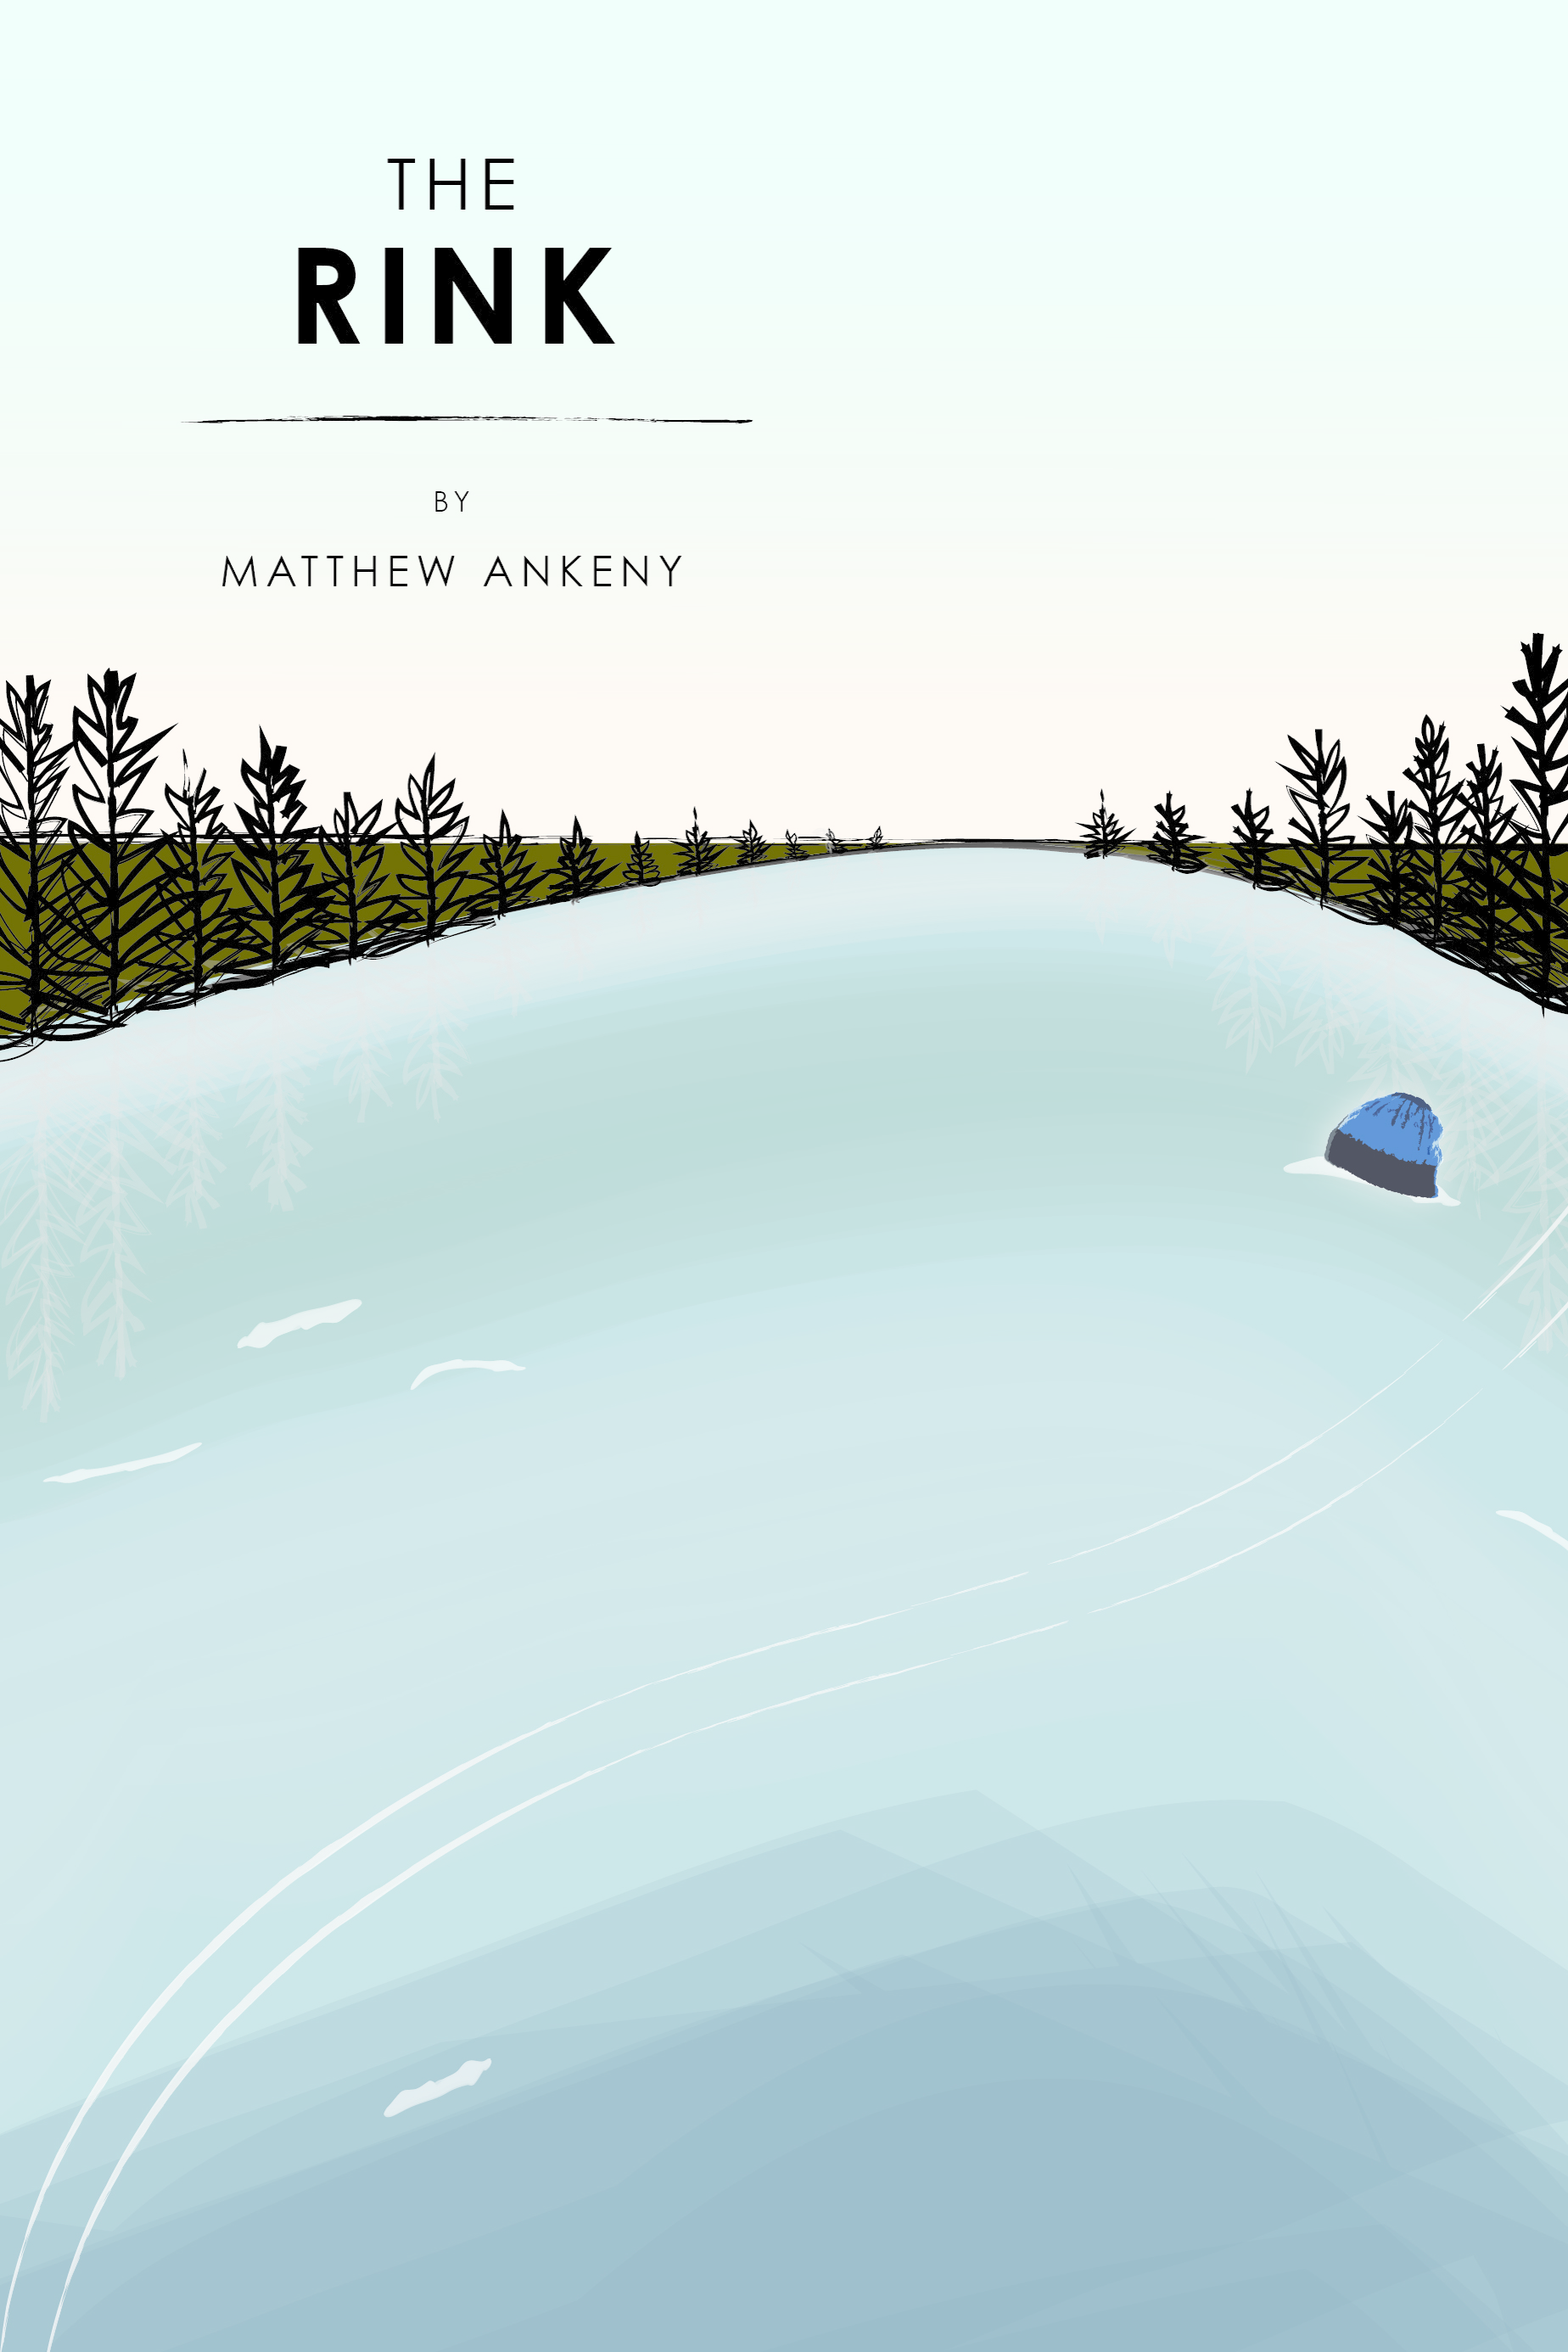 The Rink by Matthew Ankeny, a flash novel from Bartleby Snopes Press